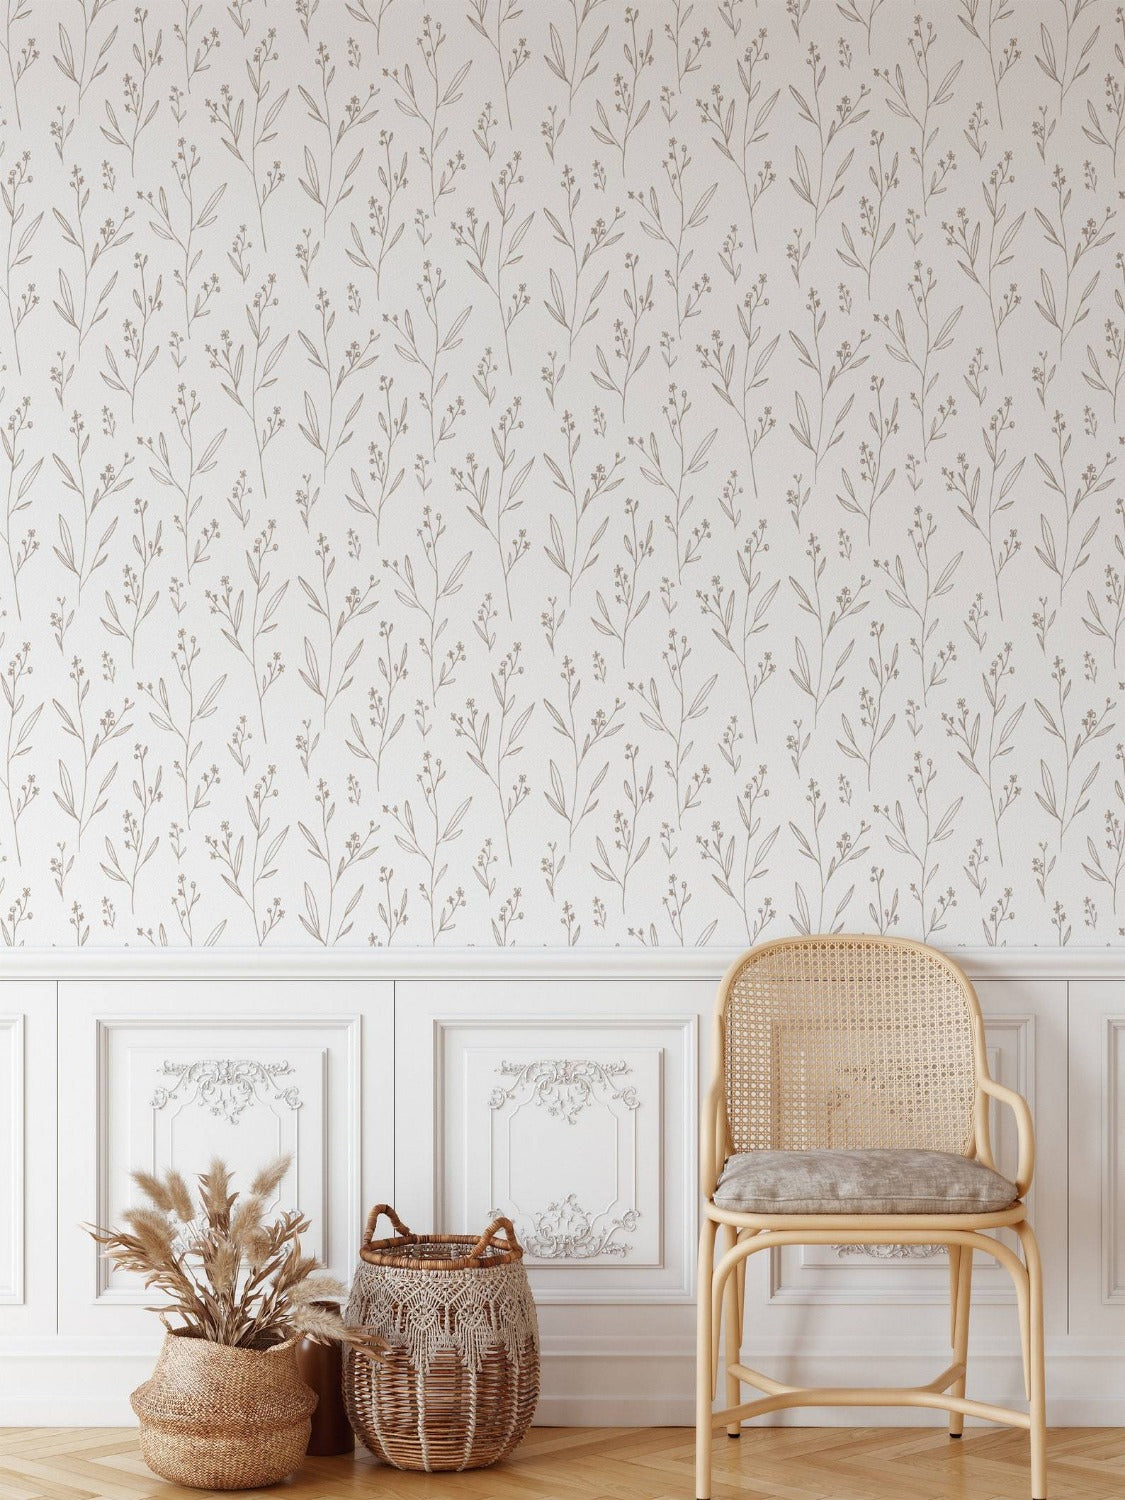  light-filled classic room featuring beige dainty minimal floral wallpaper, with elegant white wainscoting below and decorative frames, complemented by a rattan chair and woven baskets